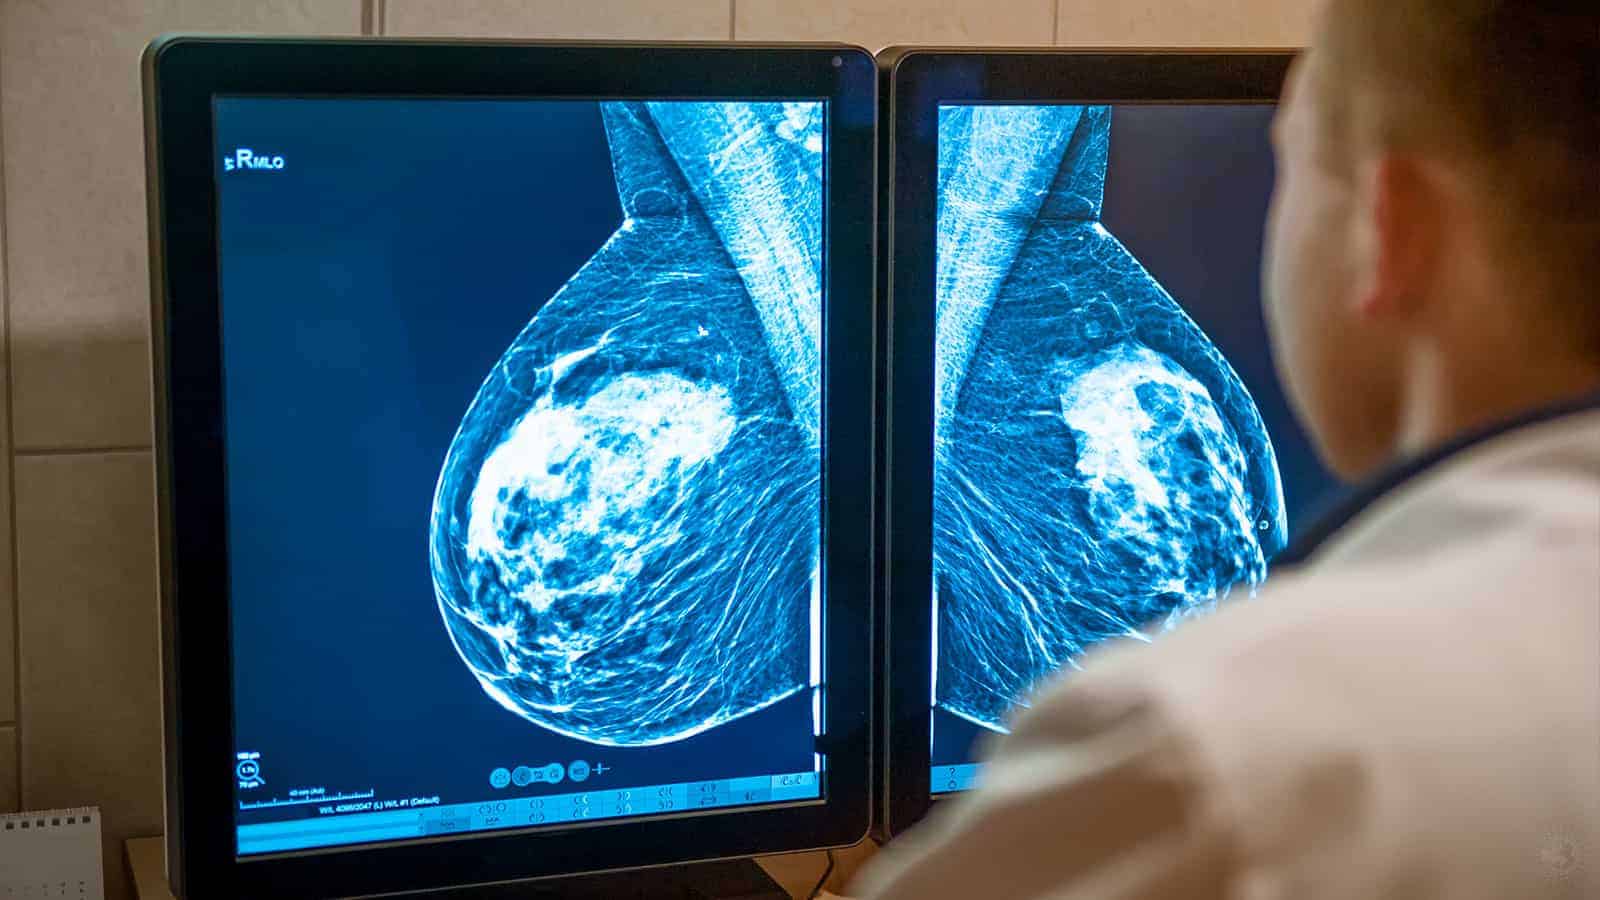 Doctors Explain Why A Mammogram Is the Best Way to Detect Breast Cancer